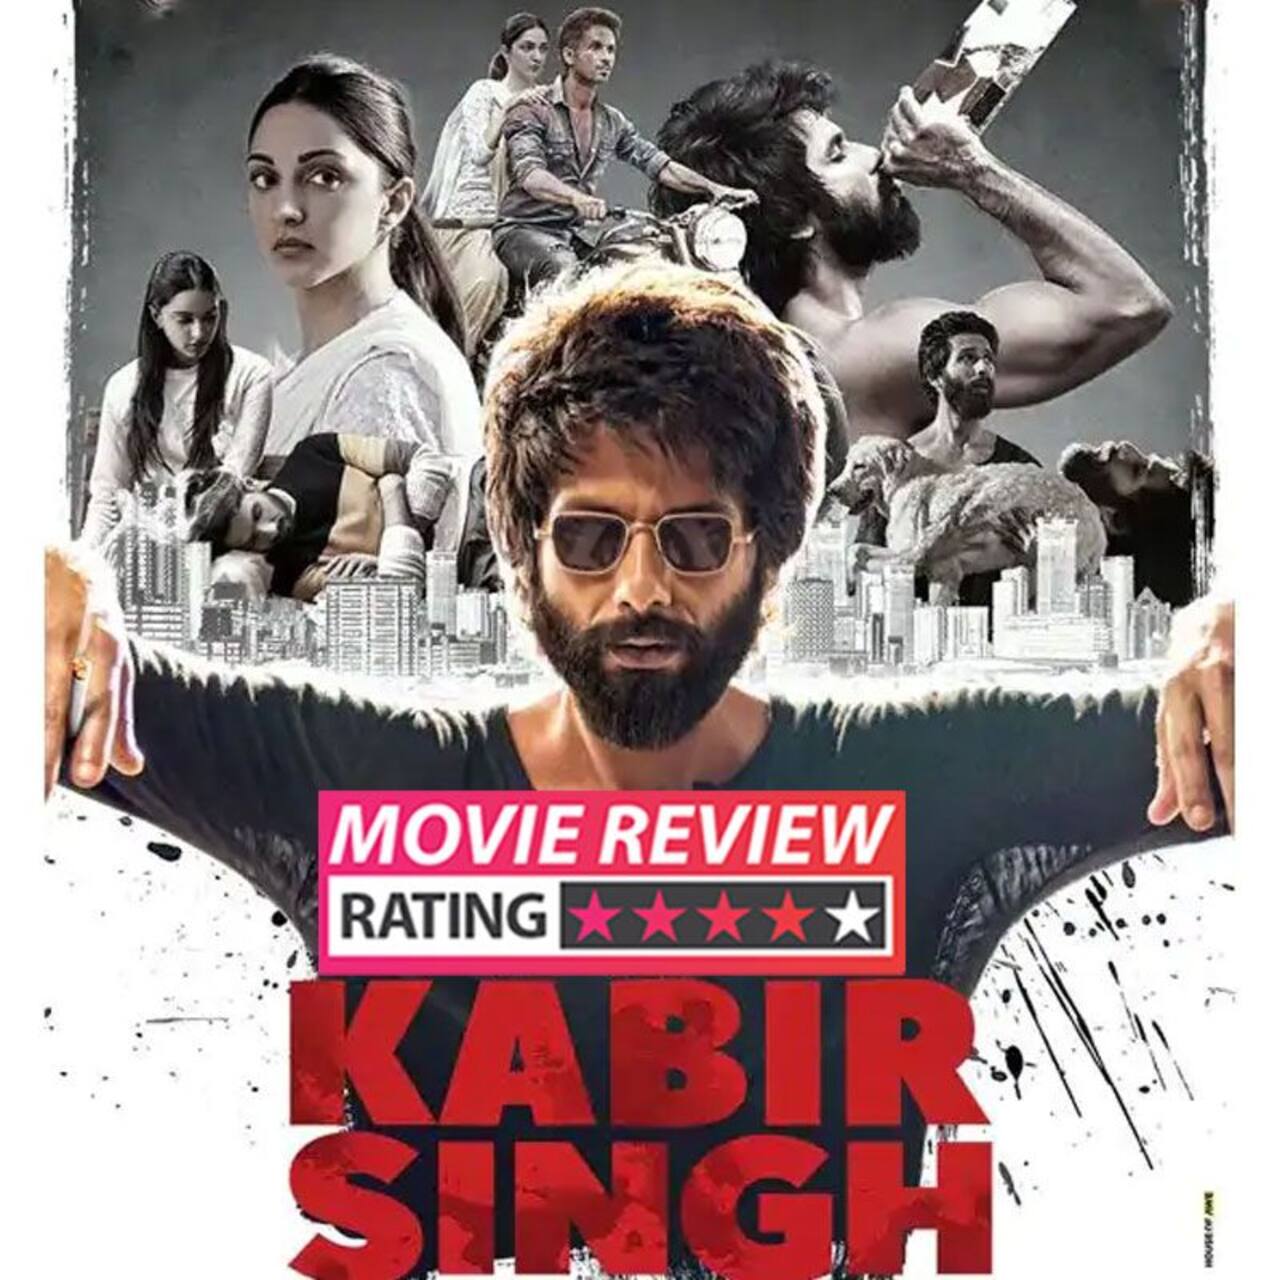 Kabir Singh movie review: Shahid Kapoor delivers a career-best performance  in this intense love story - Bollywood News & Gossip, Movie Reviews,  Trailers & Videos at 